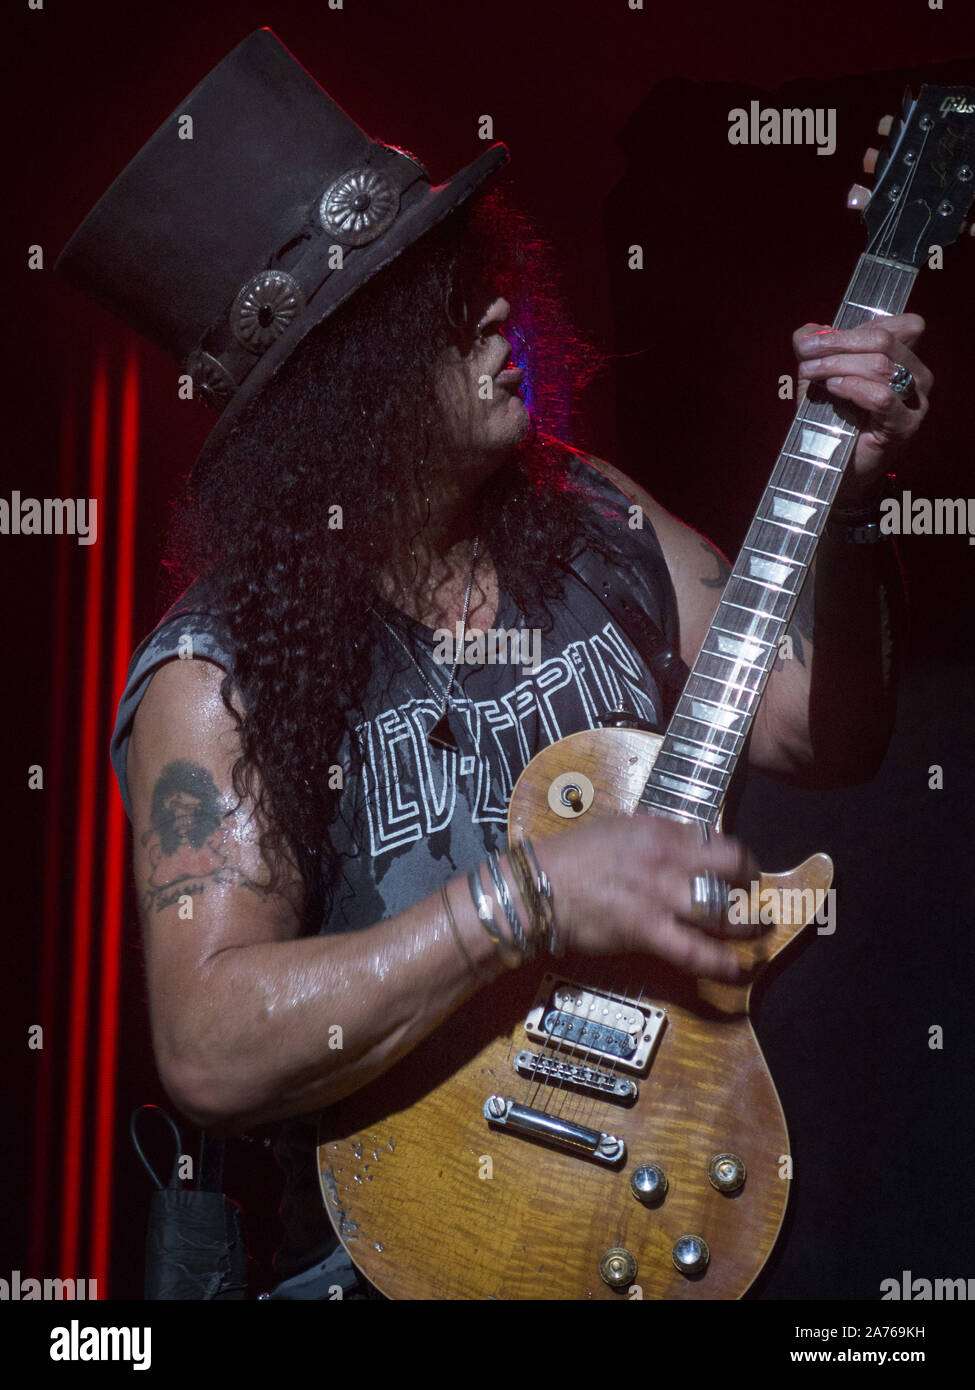 October 29, 2019, Salt Lake City, UT, USA: Guitarist Slash of the rock band Guns N' Roses performs live onstage during a concert on their The Not in This Lifetime Tour at the Vivint Smart Home Arena. (Credit Image: © KC Alfred/ZUMA Wire) Stock Photo